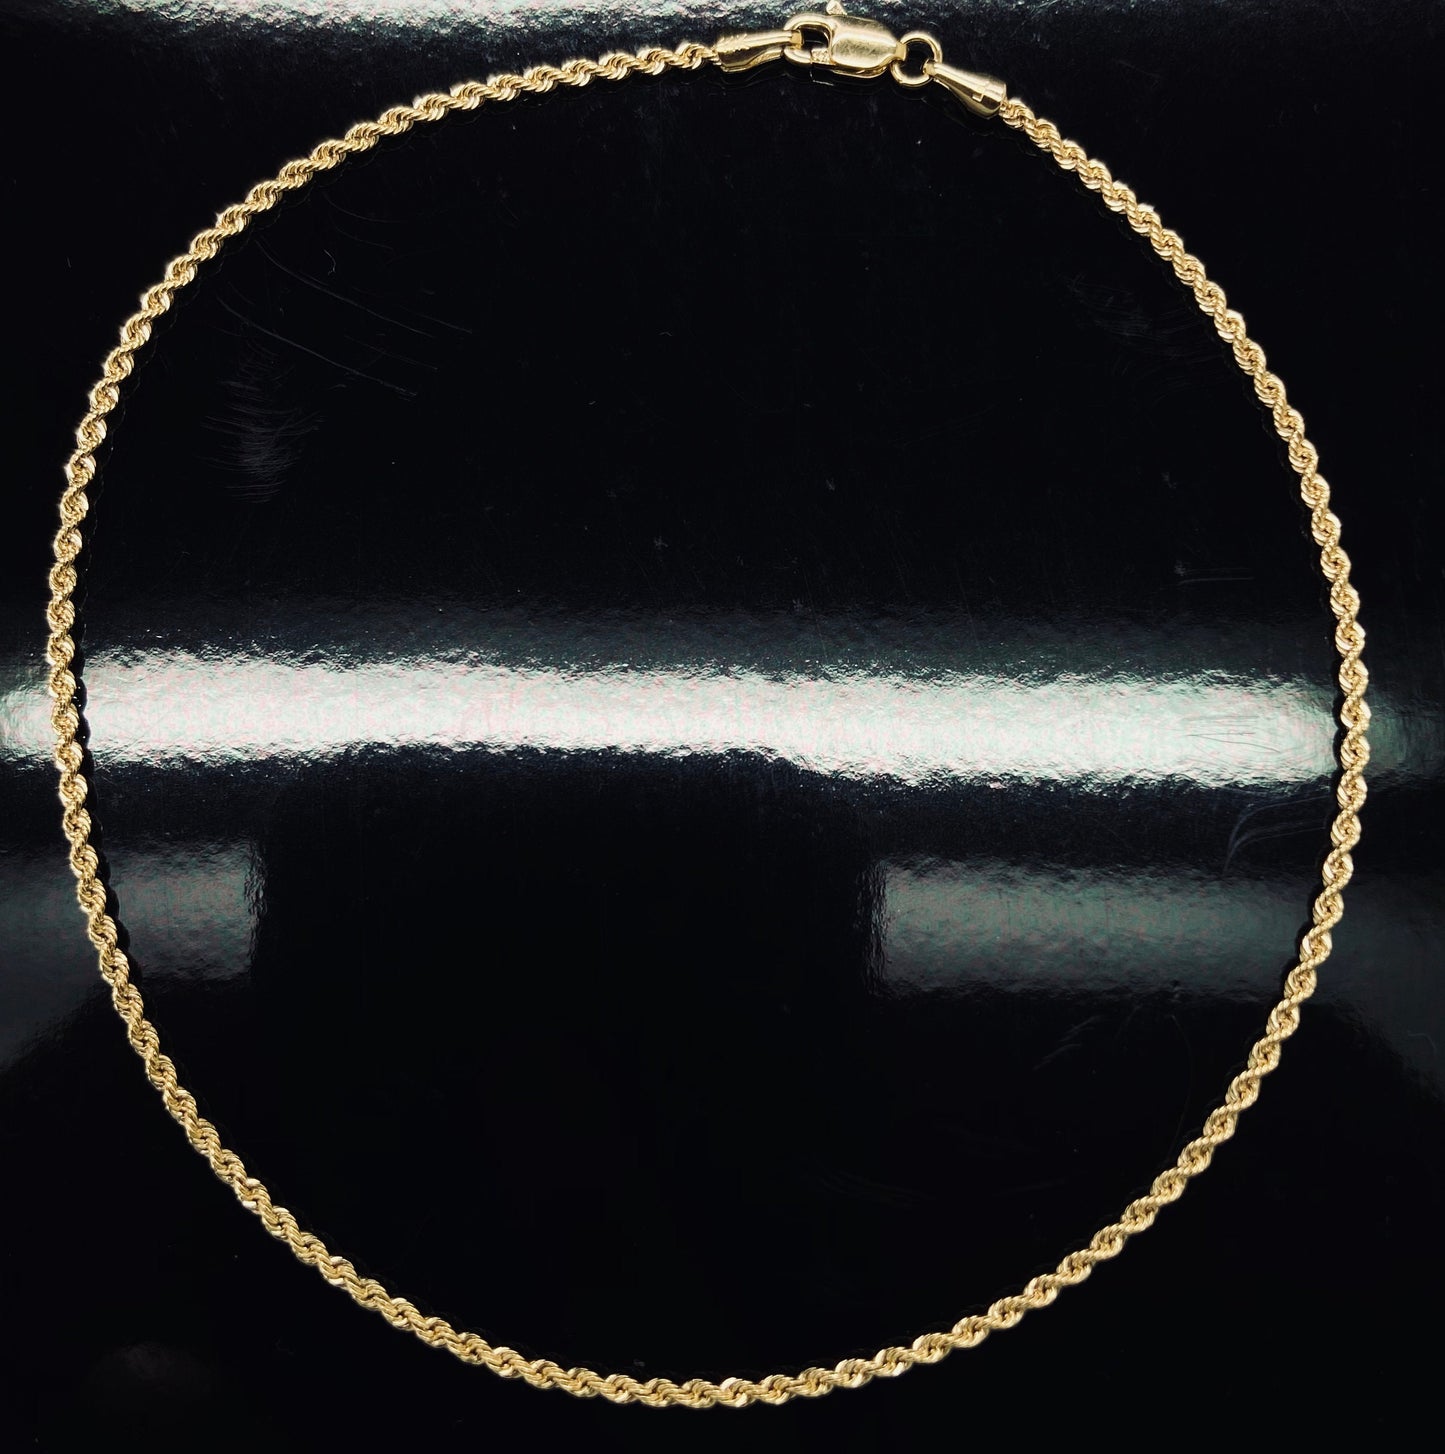 Yellow Gold High Polish Rope Link Chain Anklet Bracelet